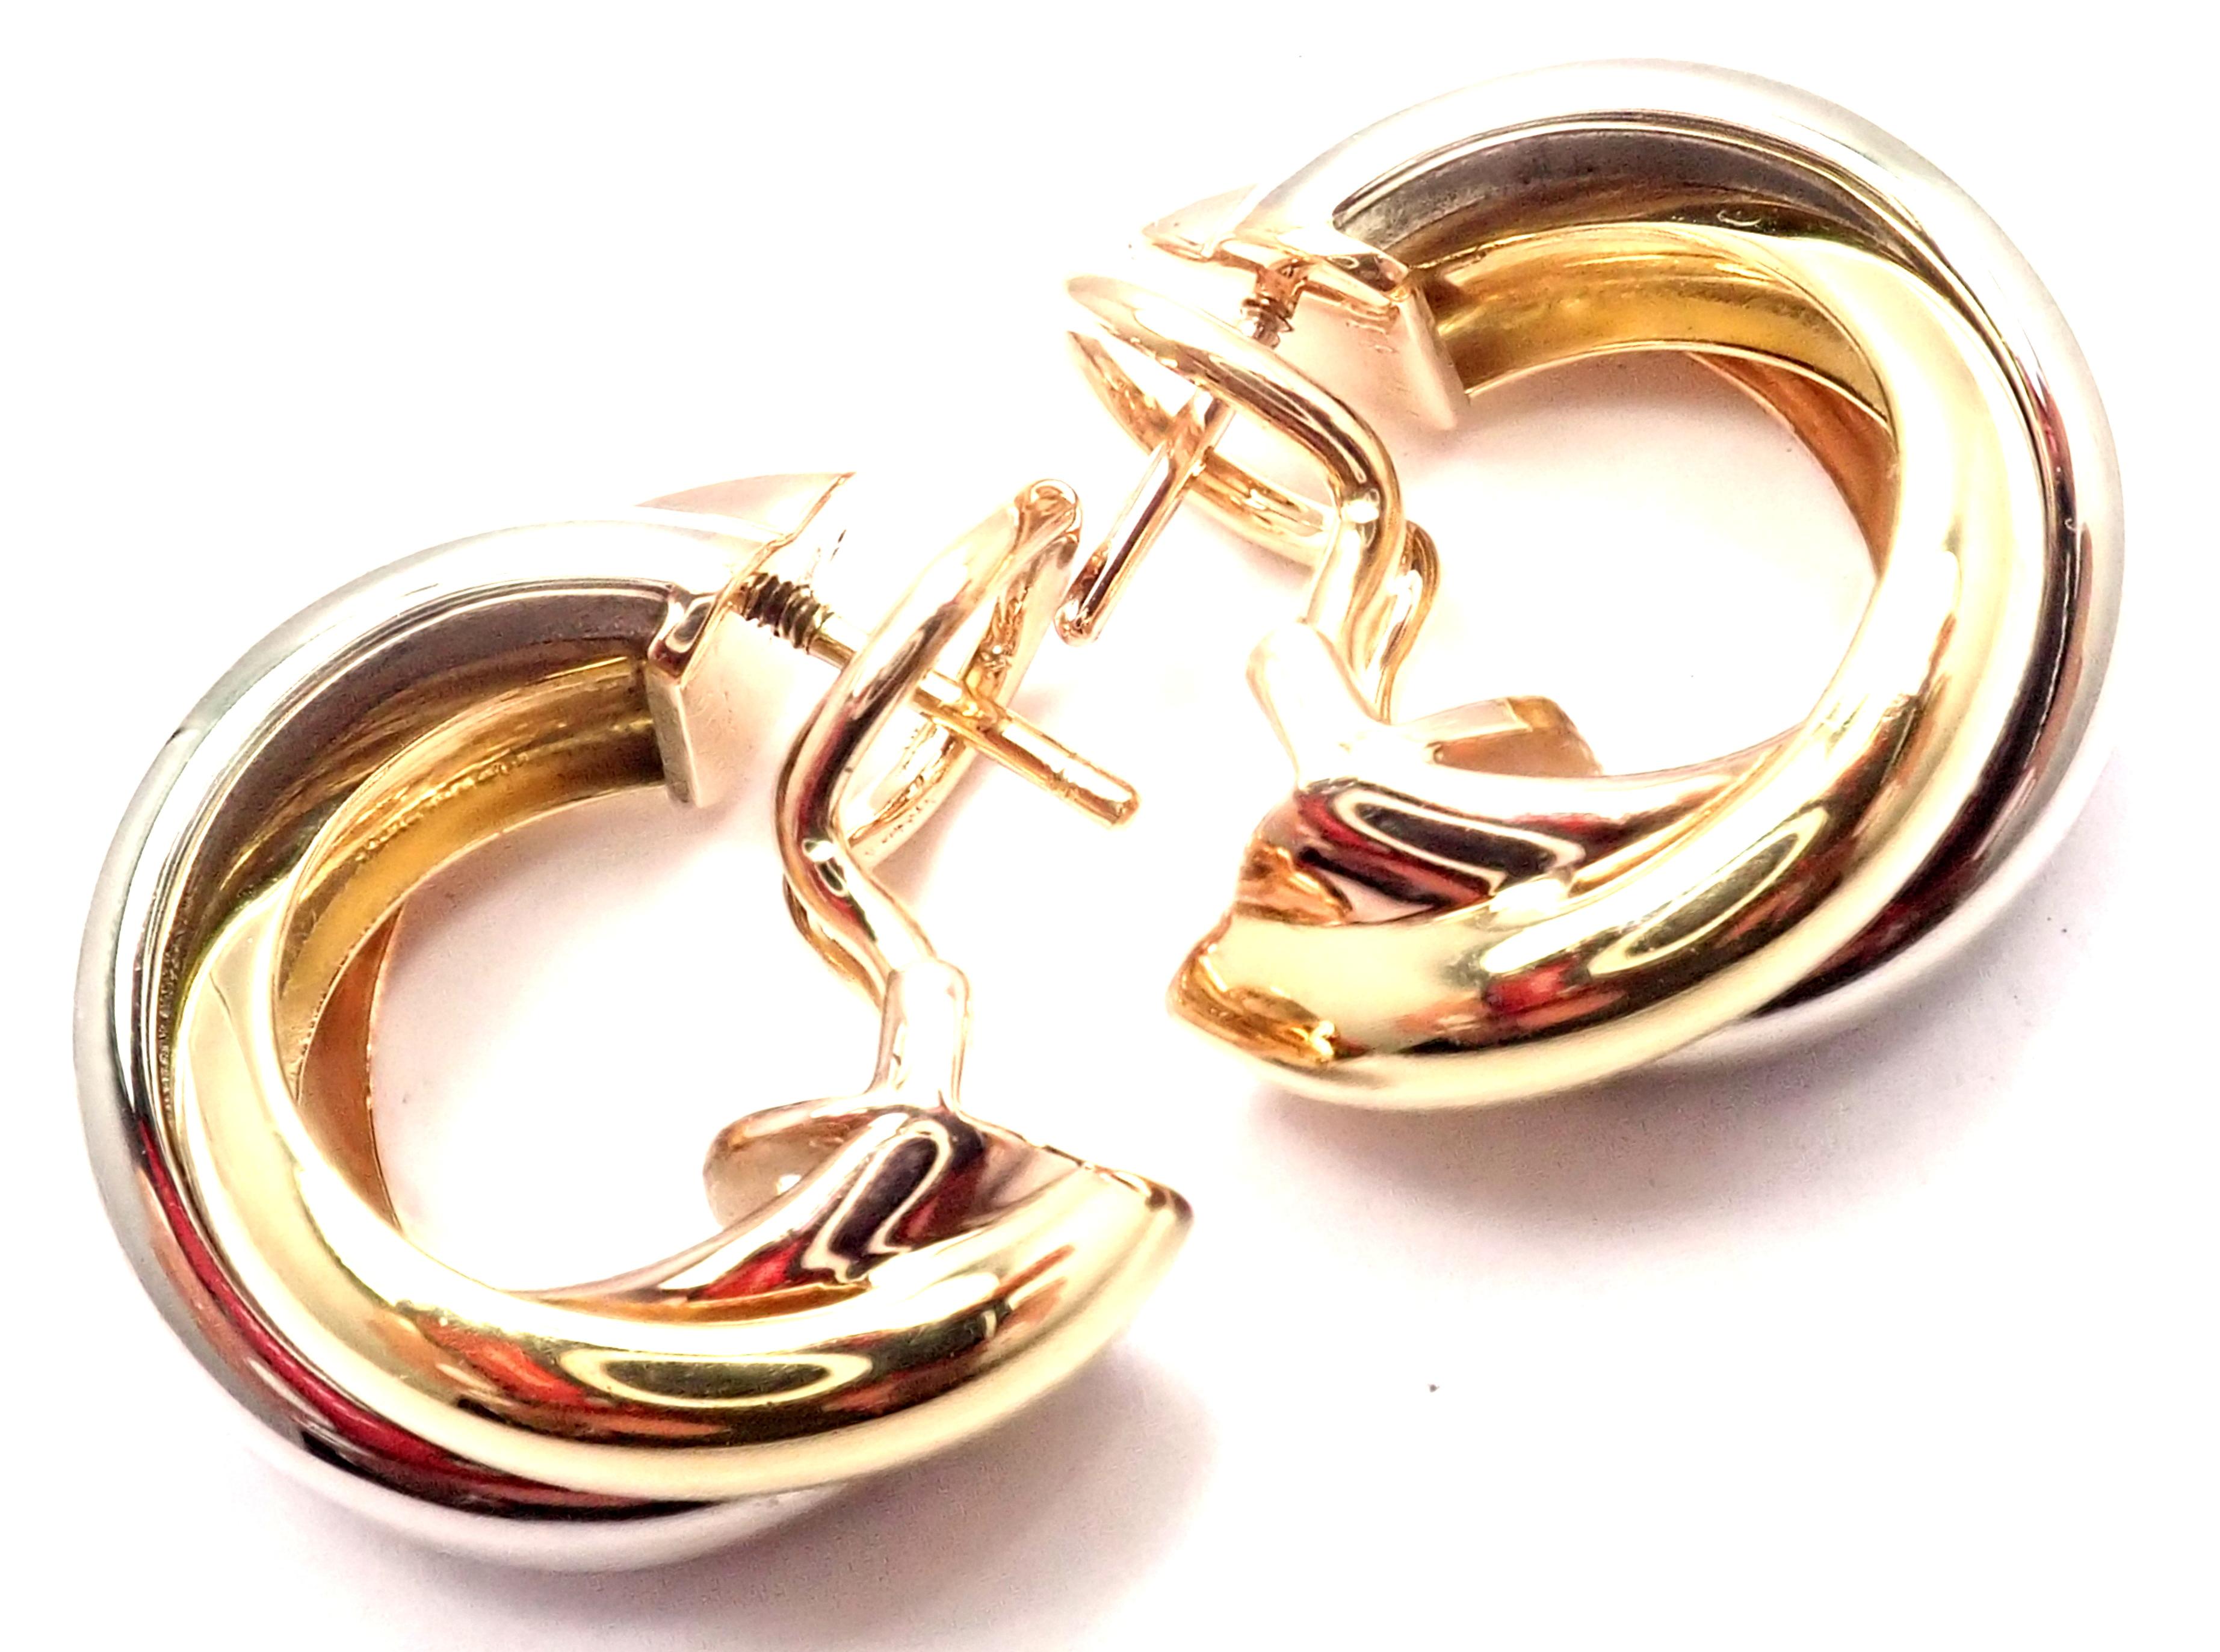 18k Tri-Color (Yellow, White, Rose) Gold Trinity Hoop Earrings by Cartier. 
These earrings are for pierced ears.
Details: 
Measurements: 19mm x 8mm
Weight: 8.7 grams
Stamped Hallmarks: Cartier 750 DXXXXX(serial number available for buyers) French